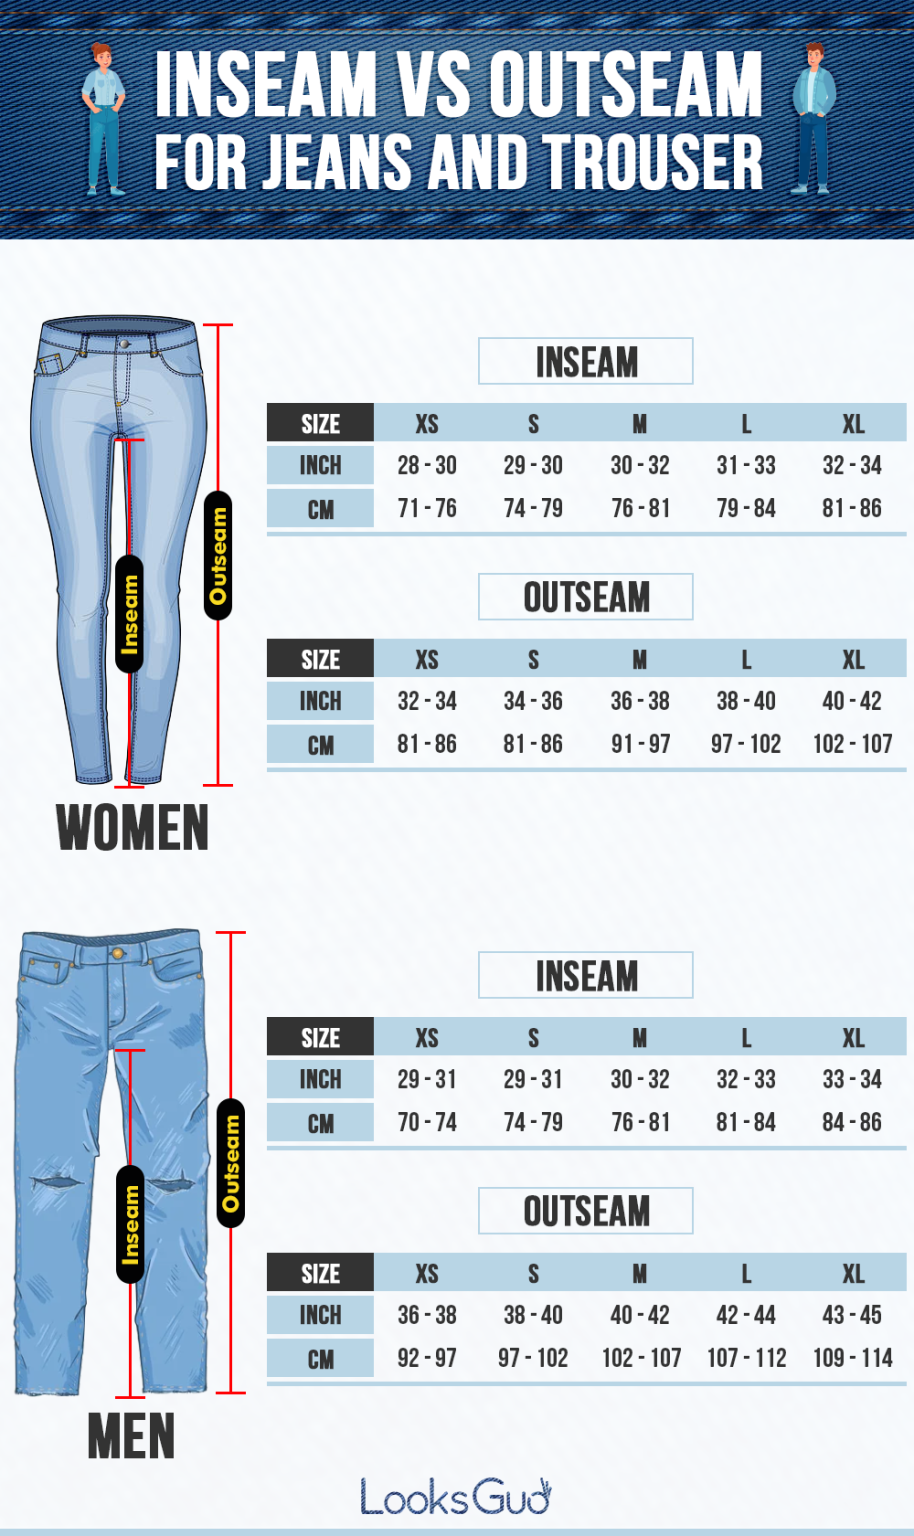 Inseam Vs Outseam for Jeans and Trouser